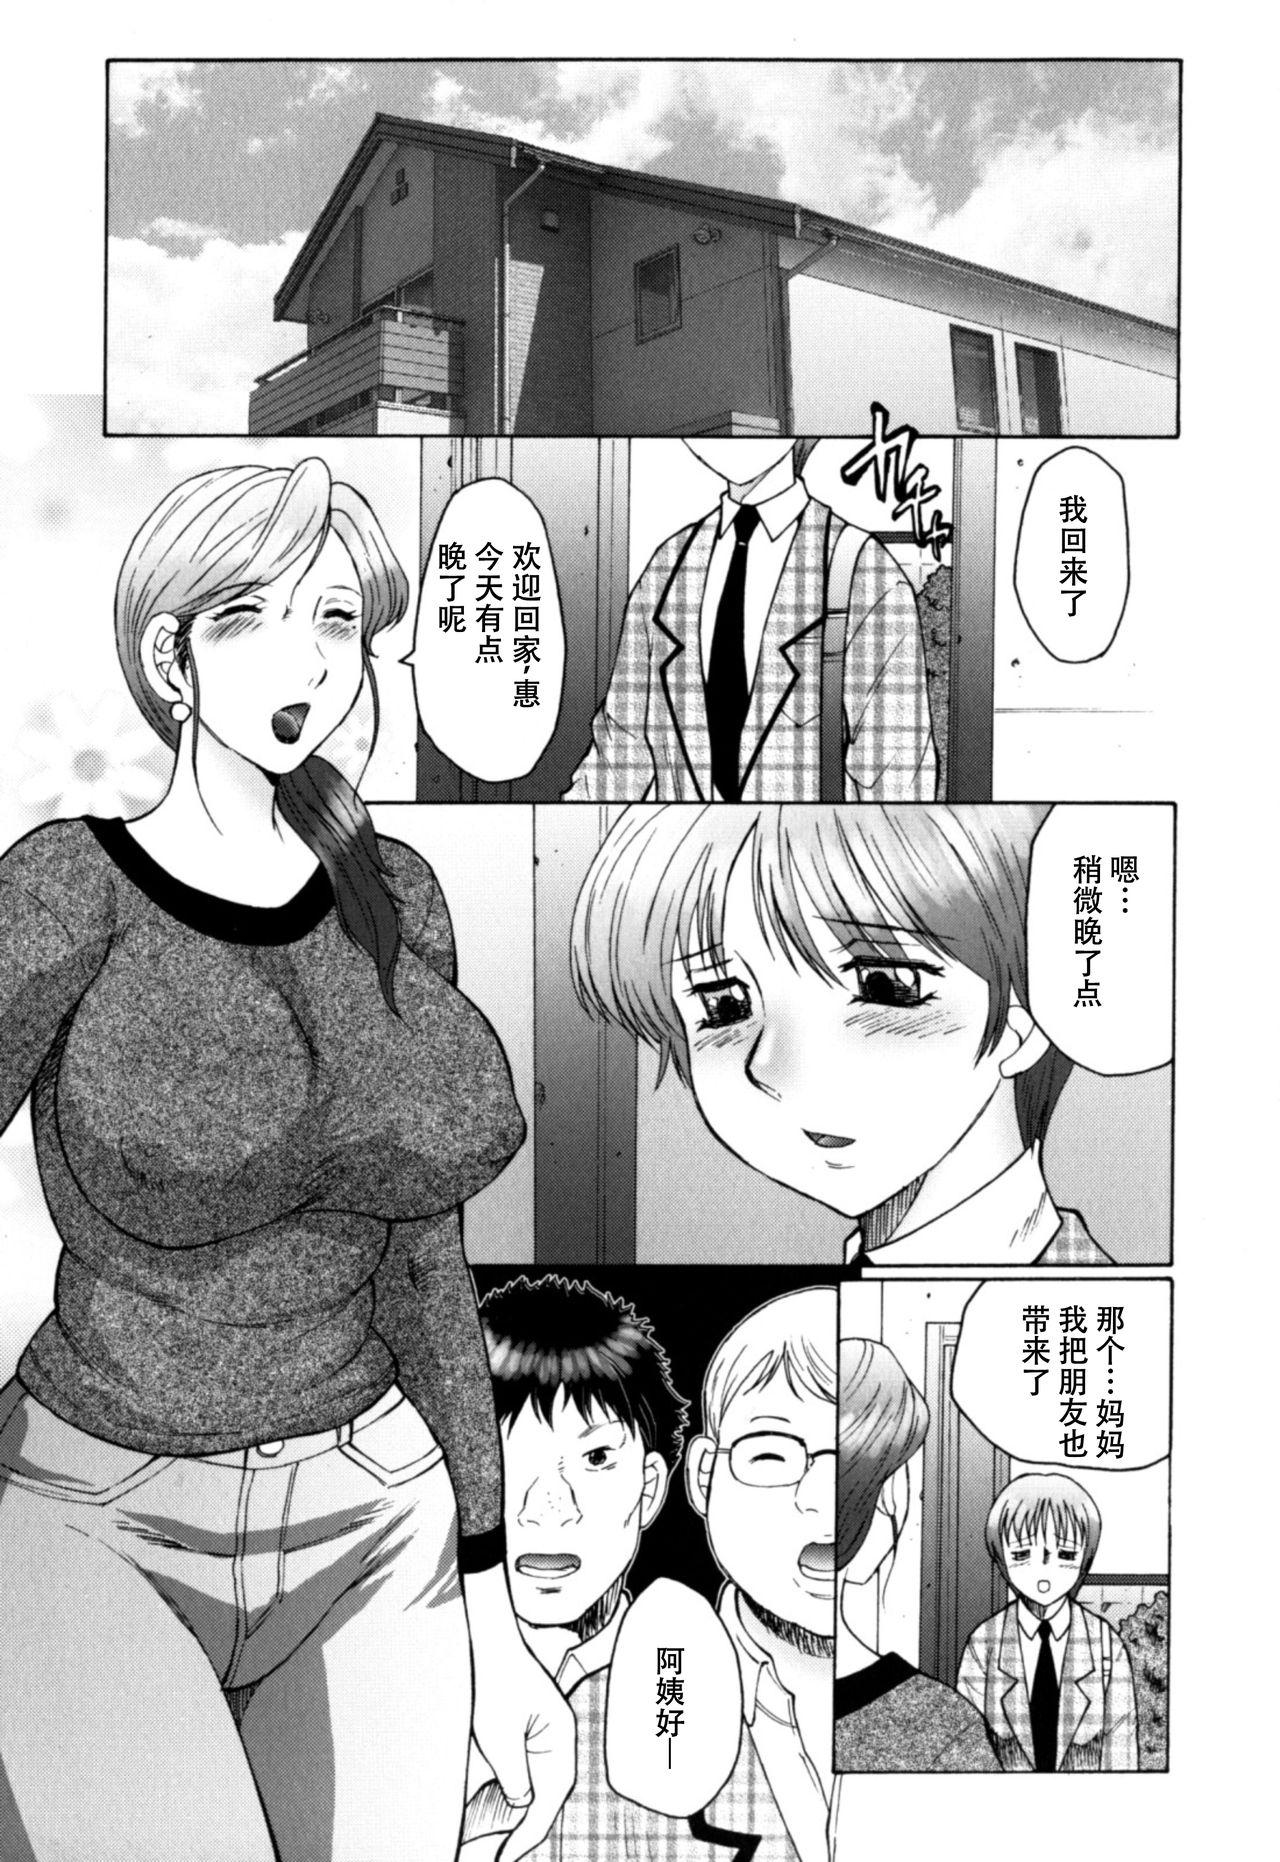 Amatures Gone Wild [Fuusen Club] Haha Mamire Ch. 1 [Chinese]【不可视汉化】 Tongue - Page 4